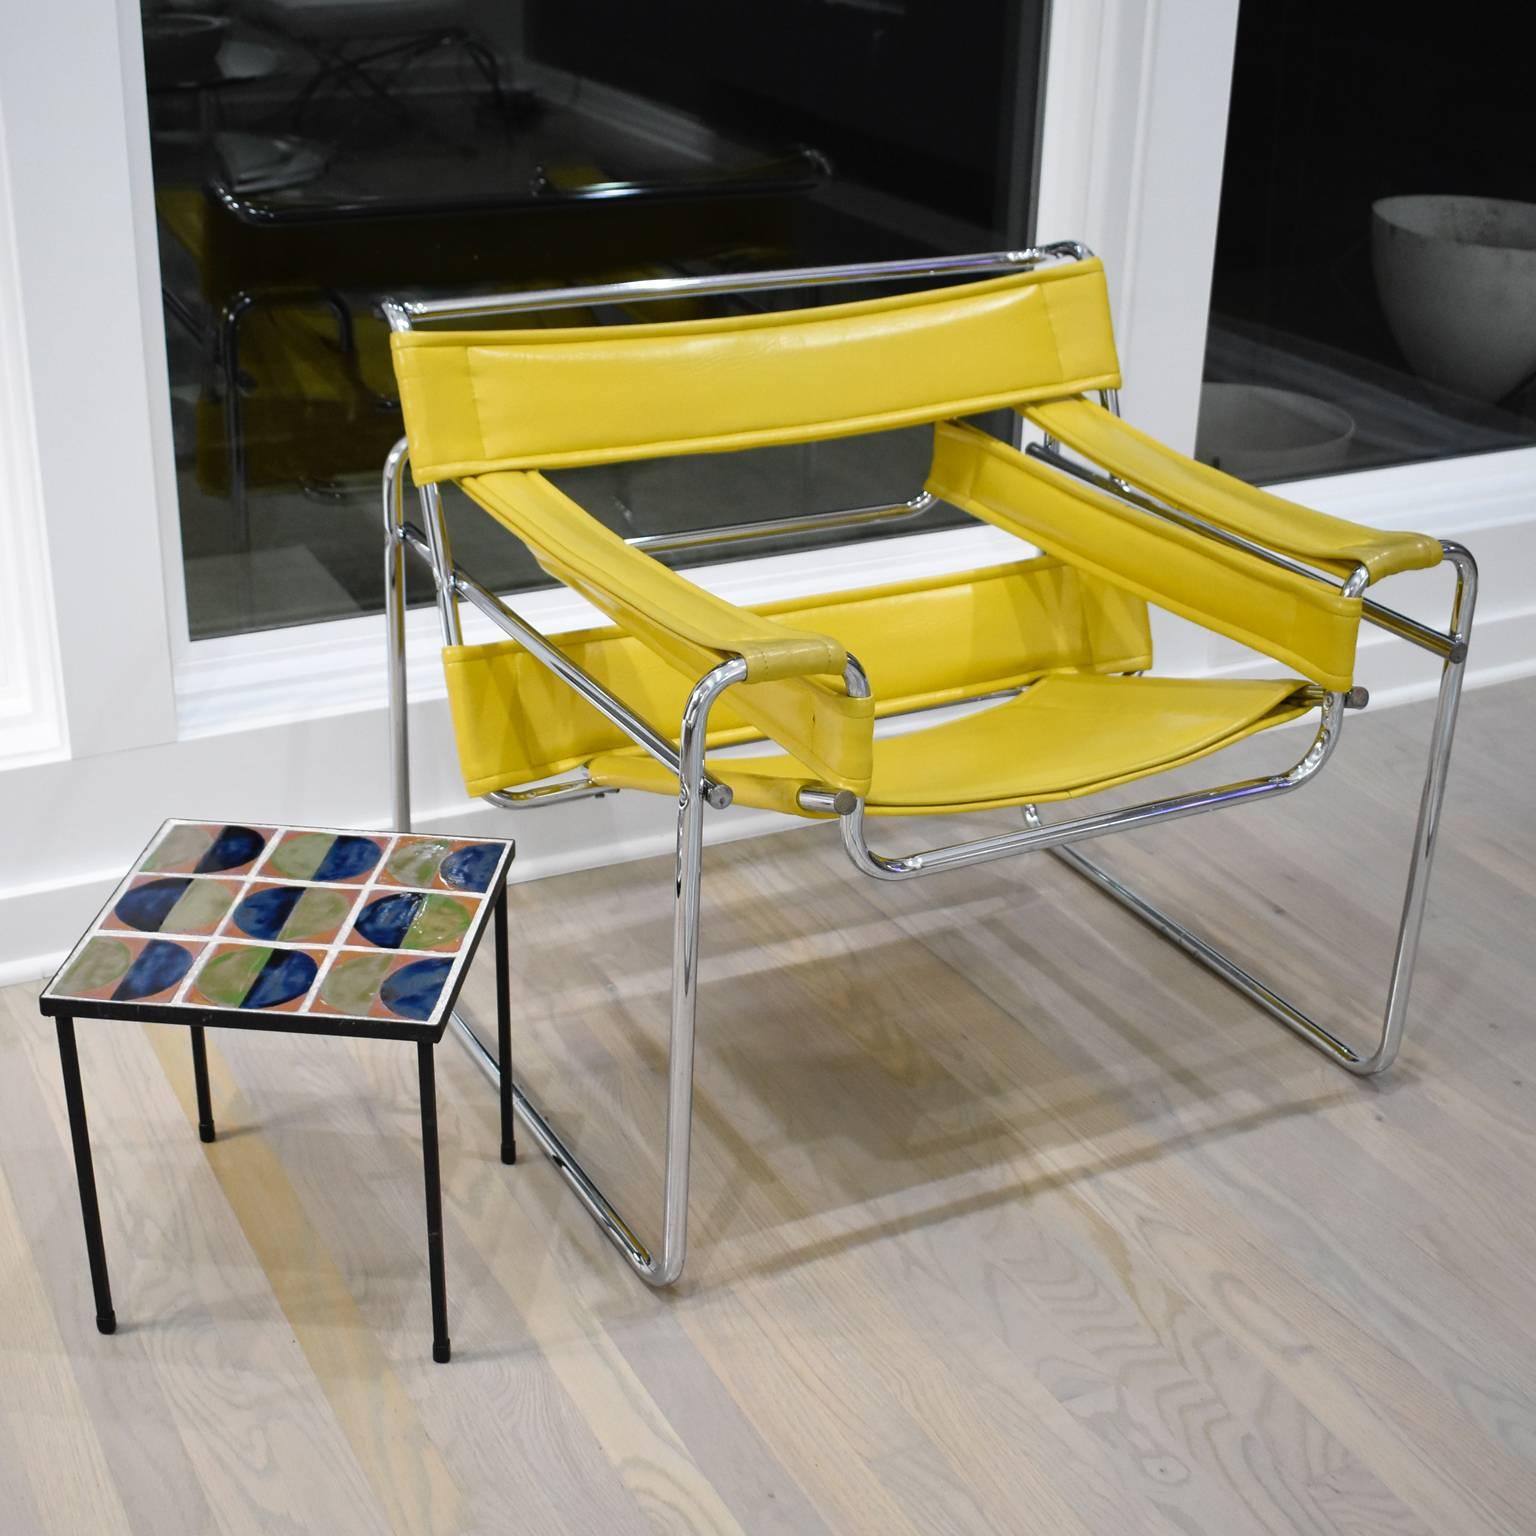 Elegant pair of coffee or side tables reminiscent of the work of the French ceramicist Mado Jolain (1921-). Framing and legs are solid wrought iron with a shiny black finish - simple, functional and sturdy. Lovely colorful glazed ceramic tiles table